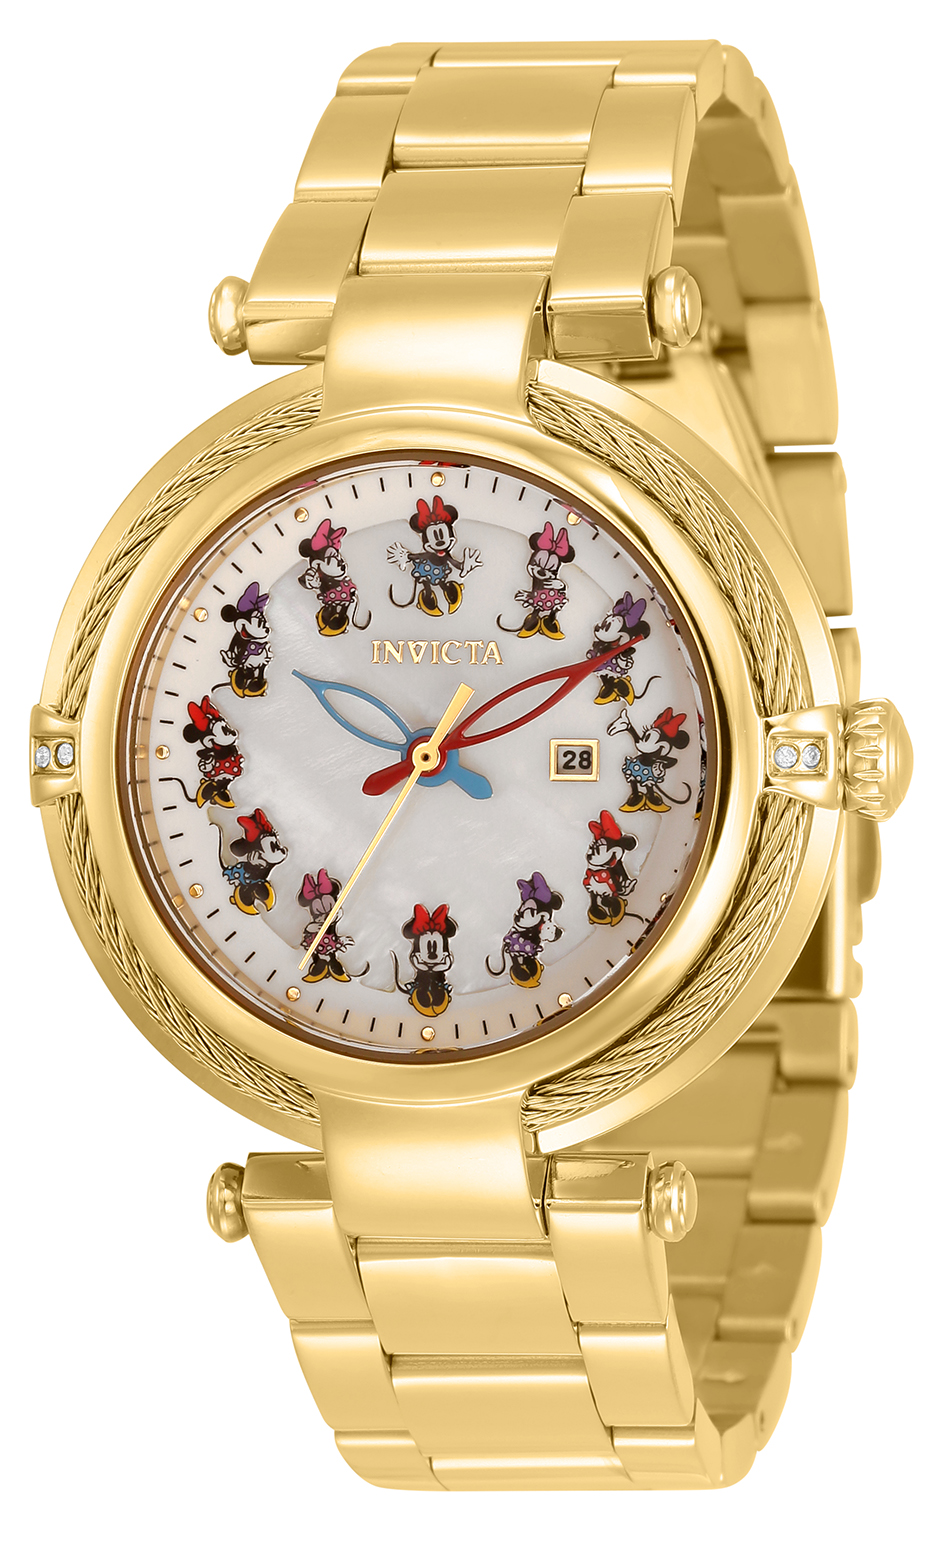 Invicta Disney Limited Edition Minnie Mouse Women's Watch w/ Mother of Pearl Dial - 40mm, Gold (34112)